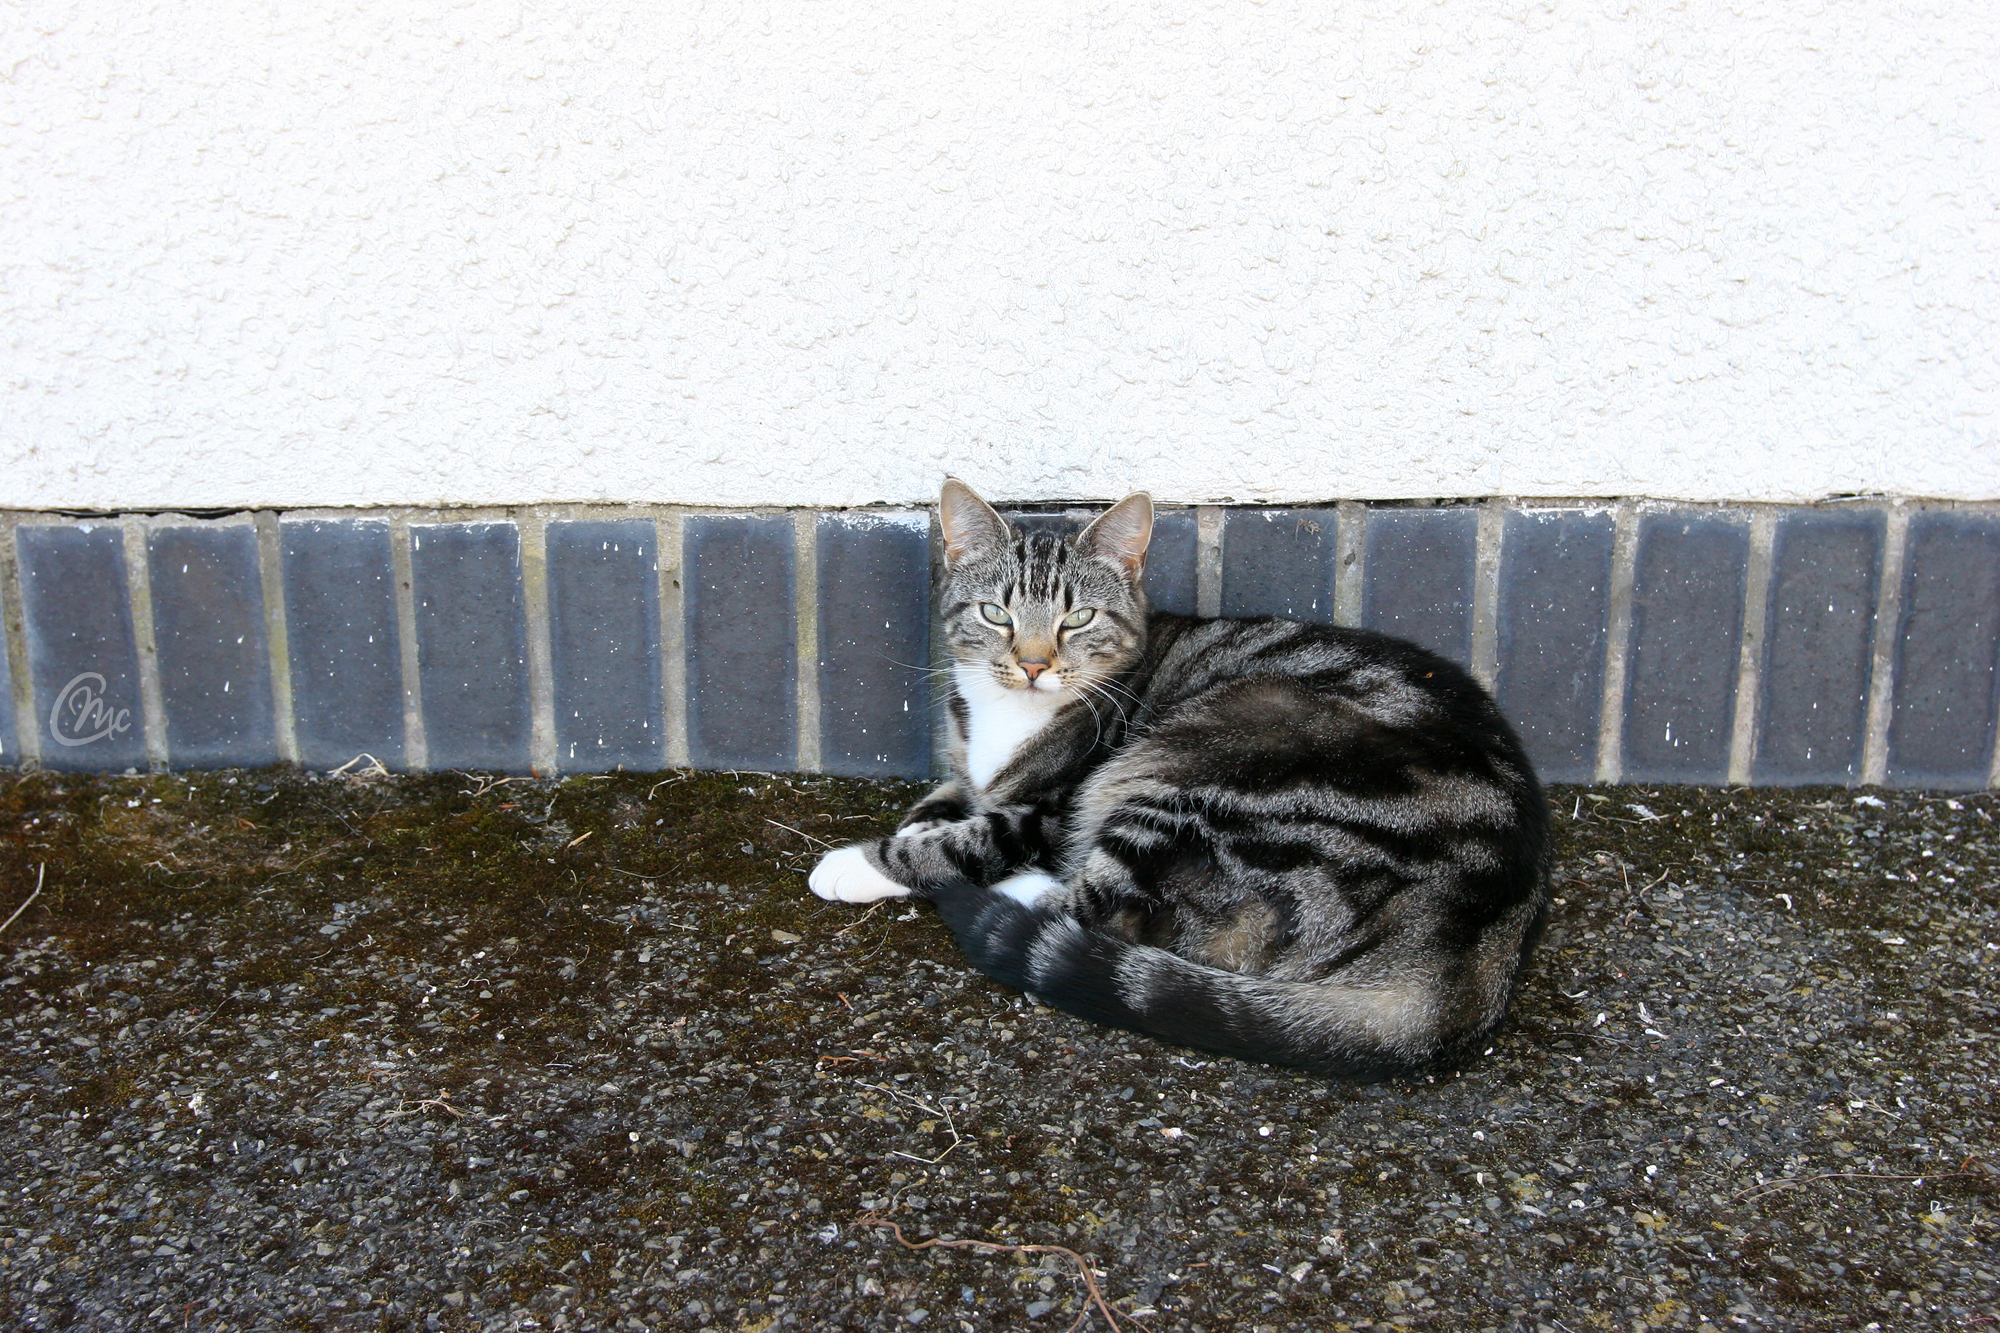 Cats of Clovelly (project)